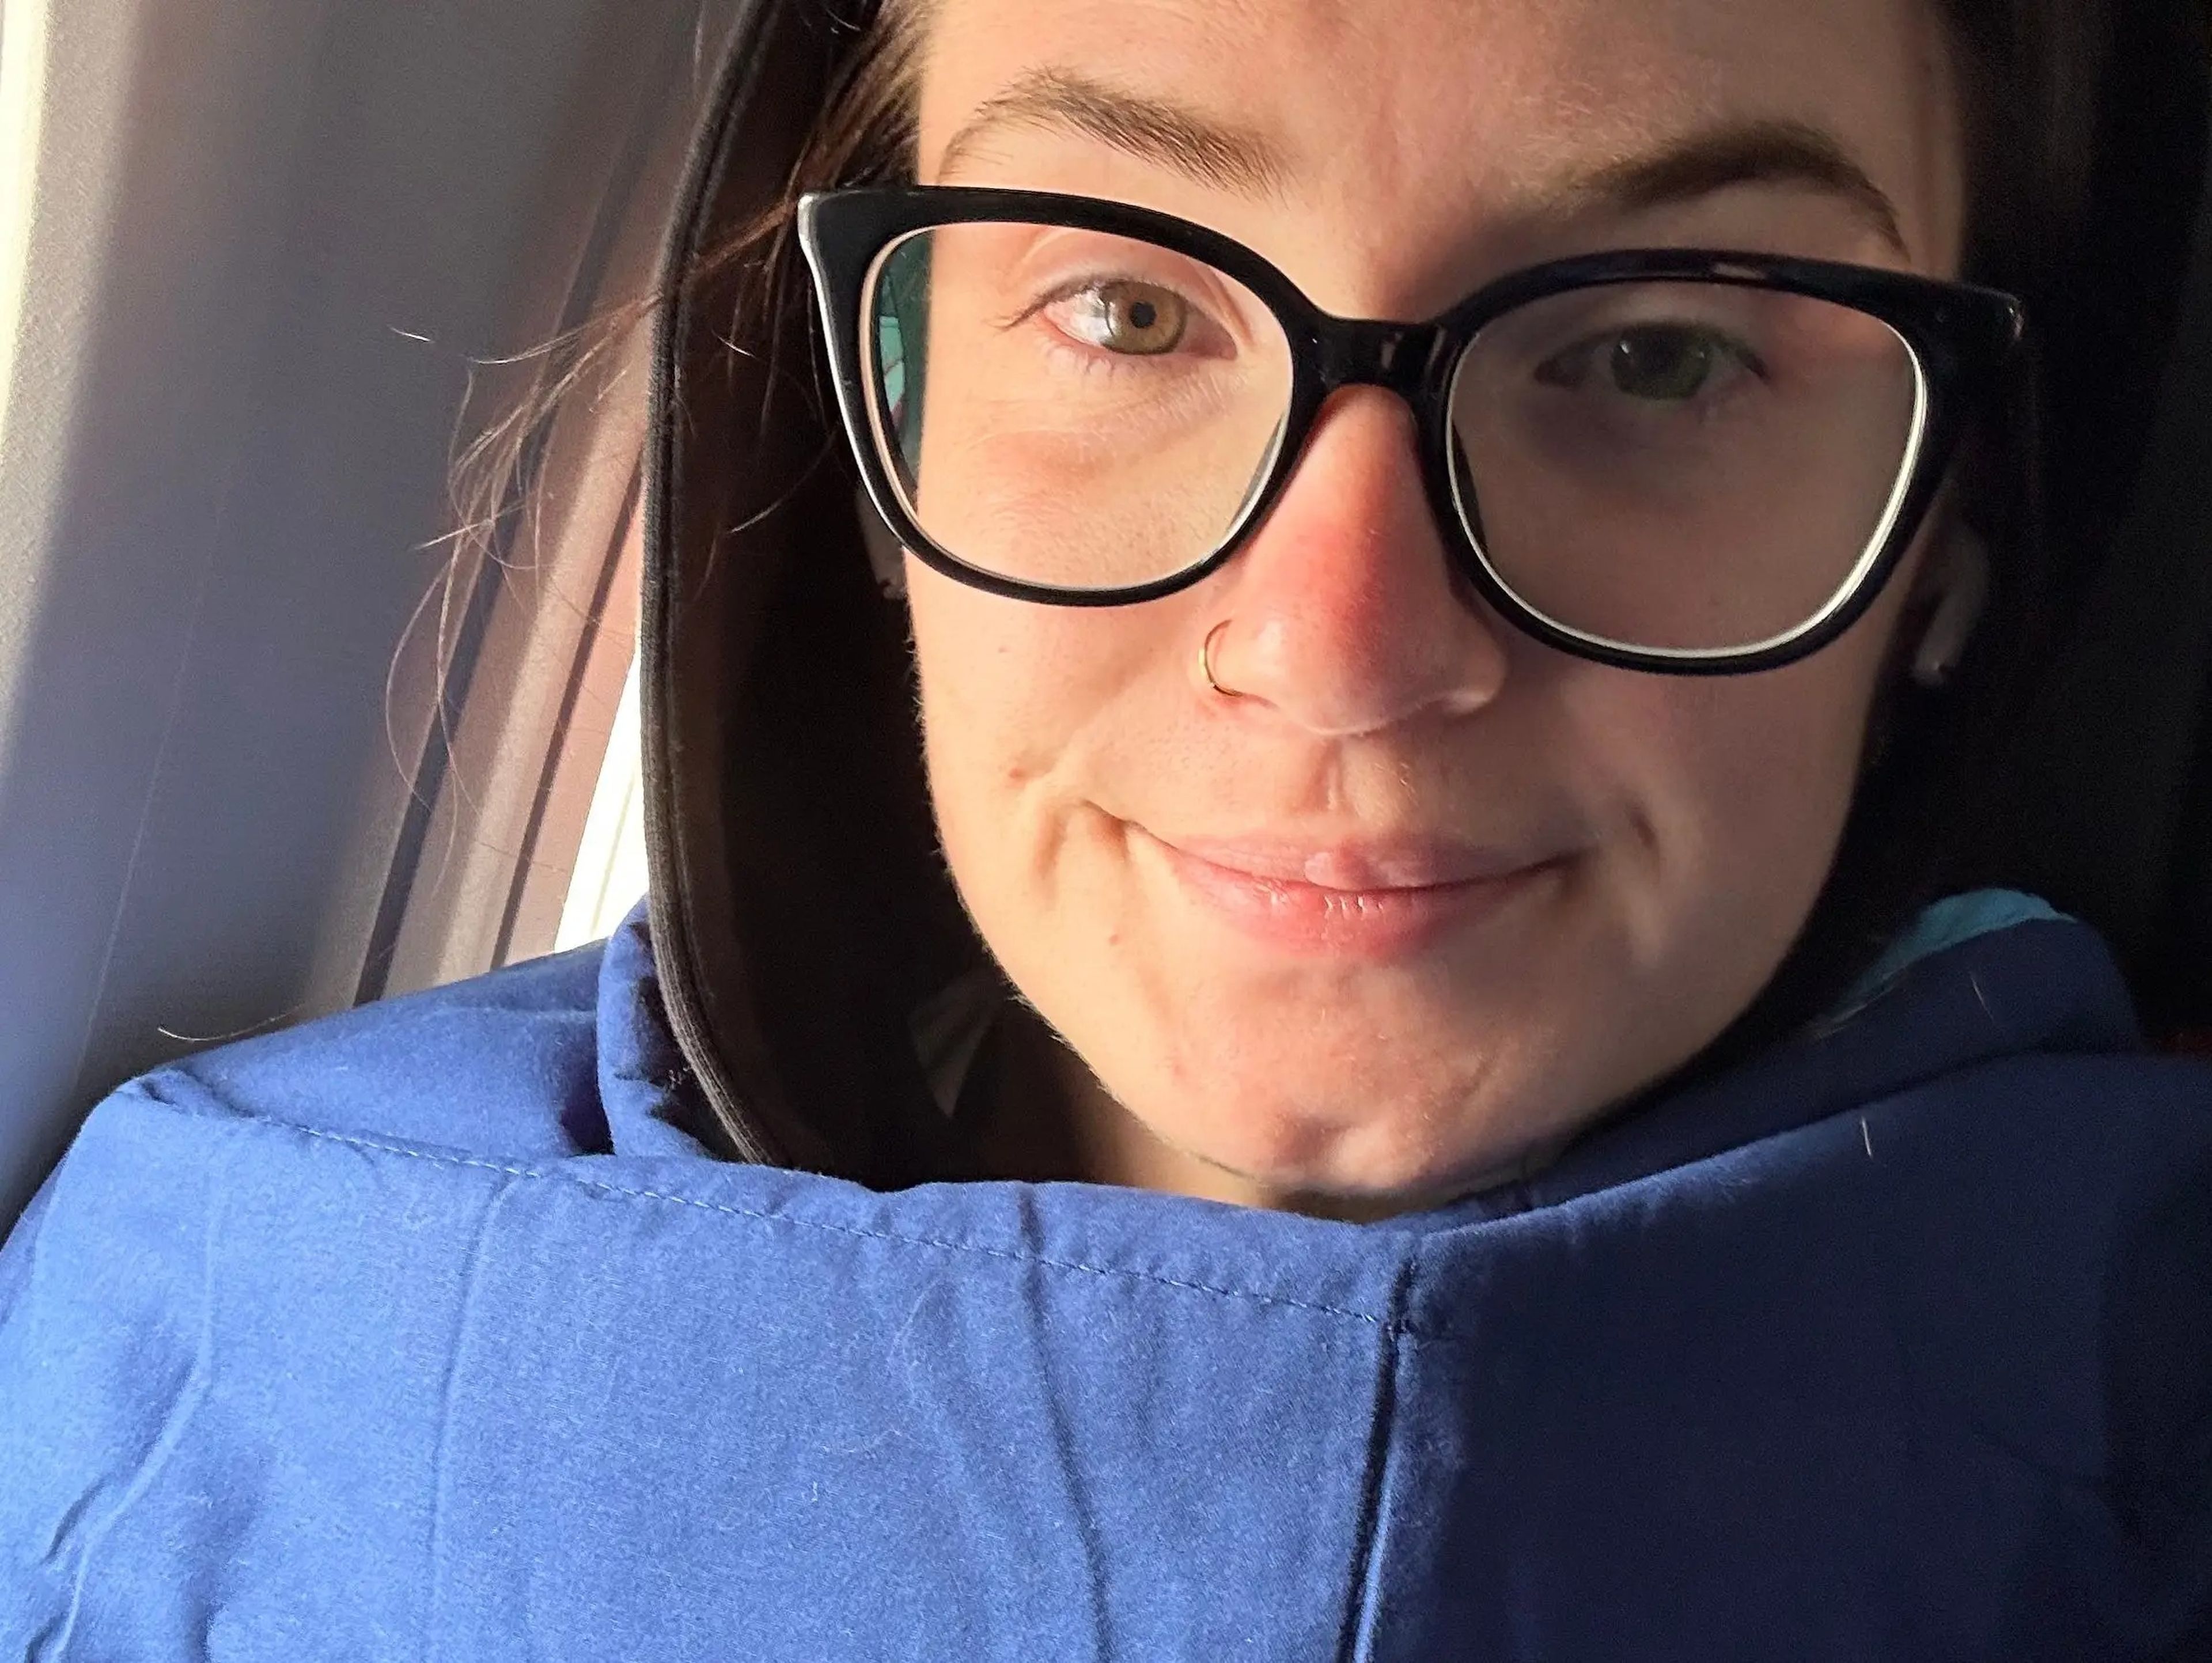 Insider's reporter bundled up in blankets to sleep in economy.